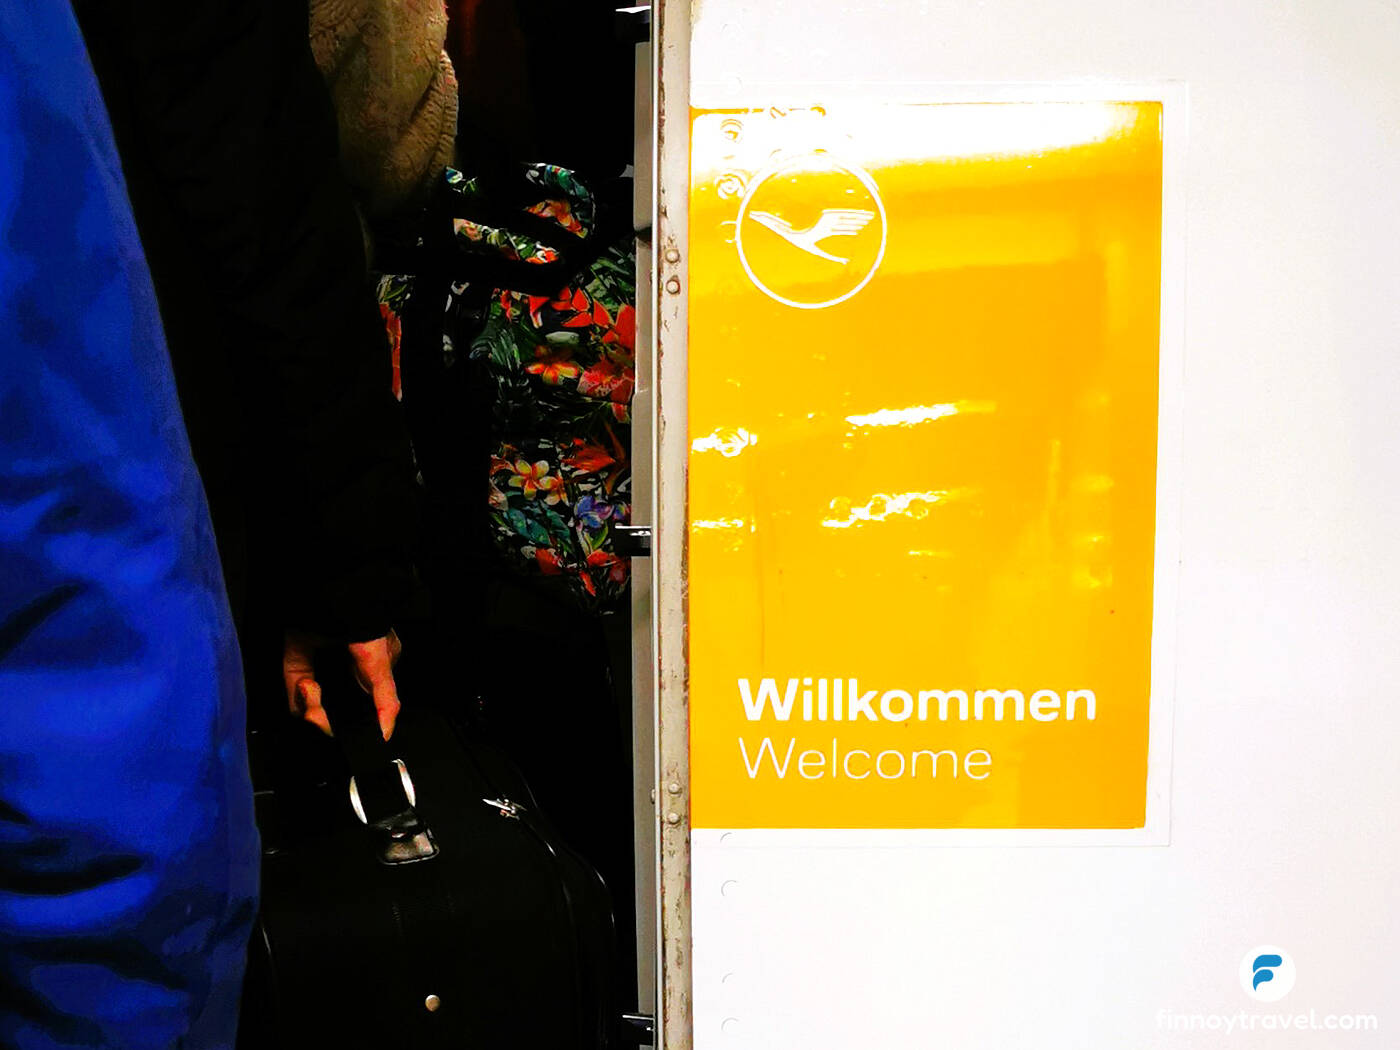 A welcome sign at the door of Lufthansa aeroplane